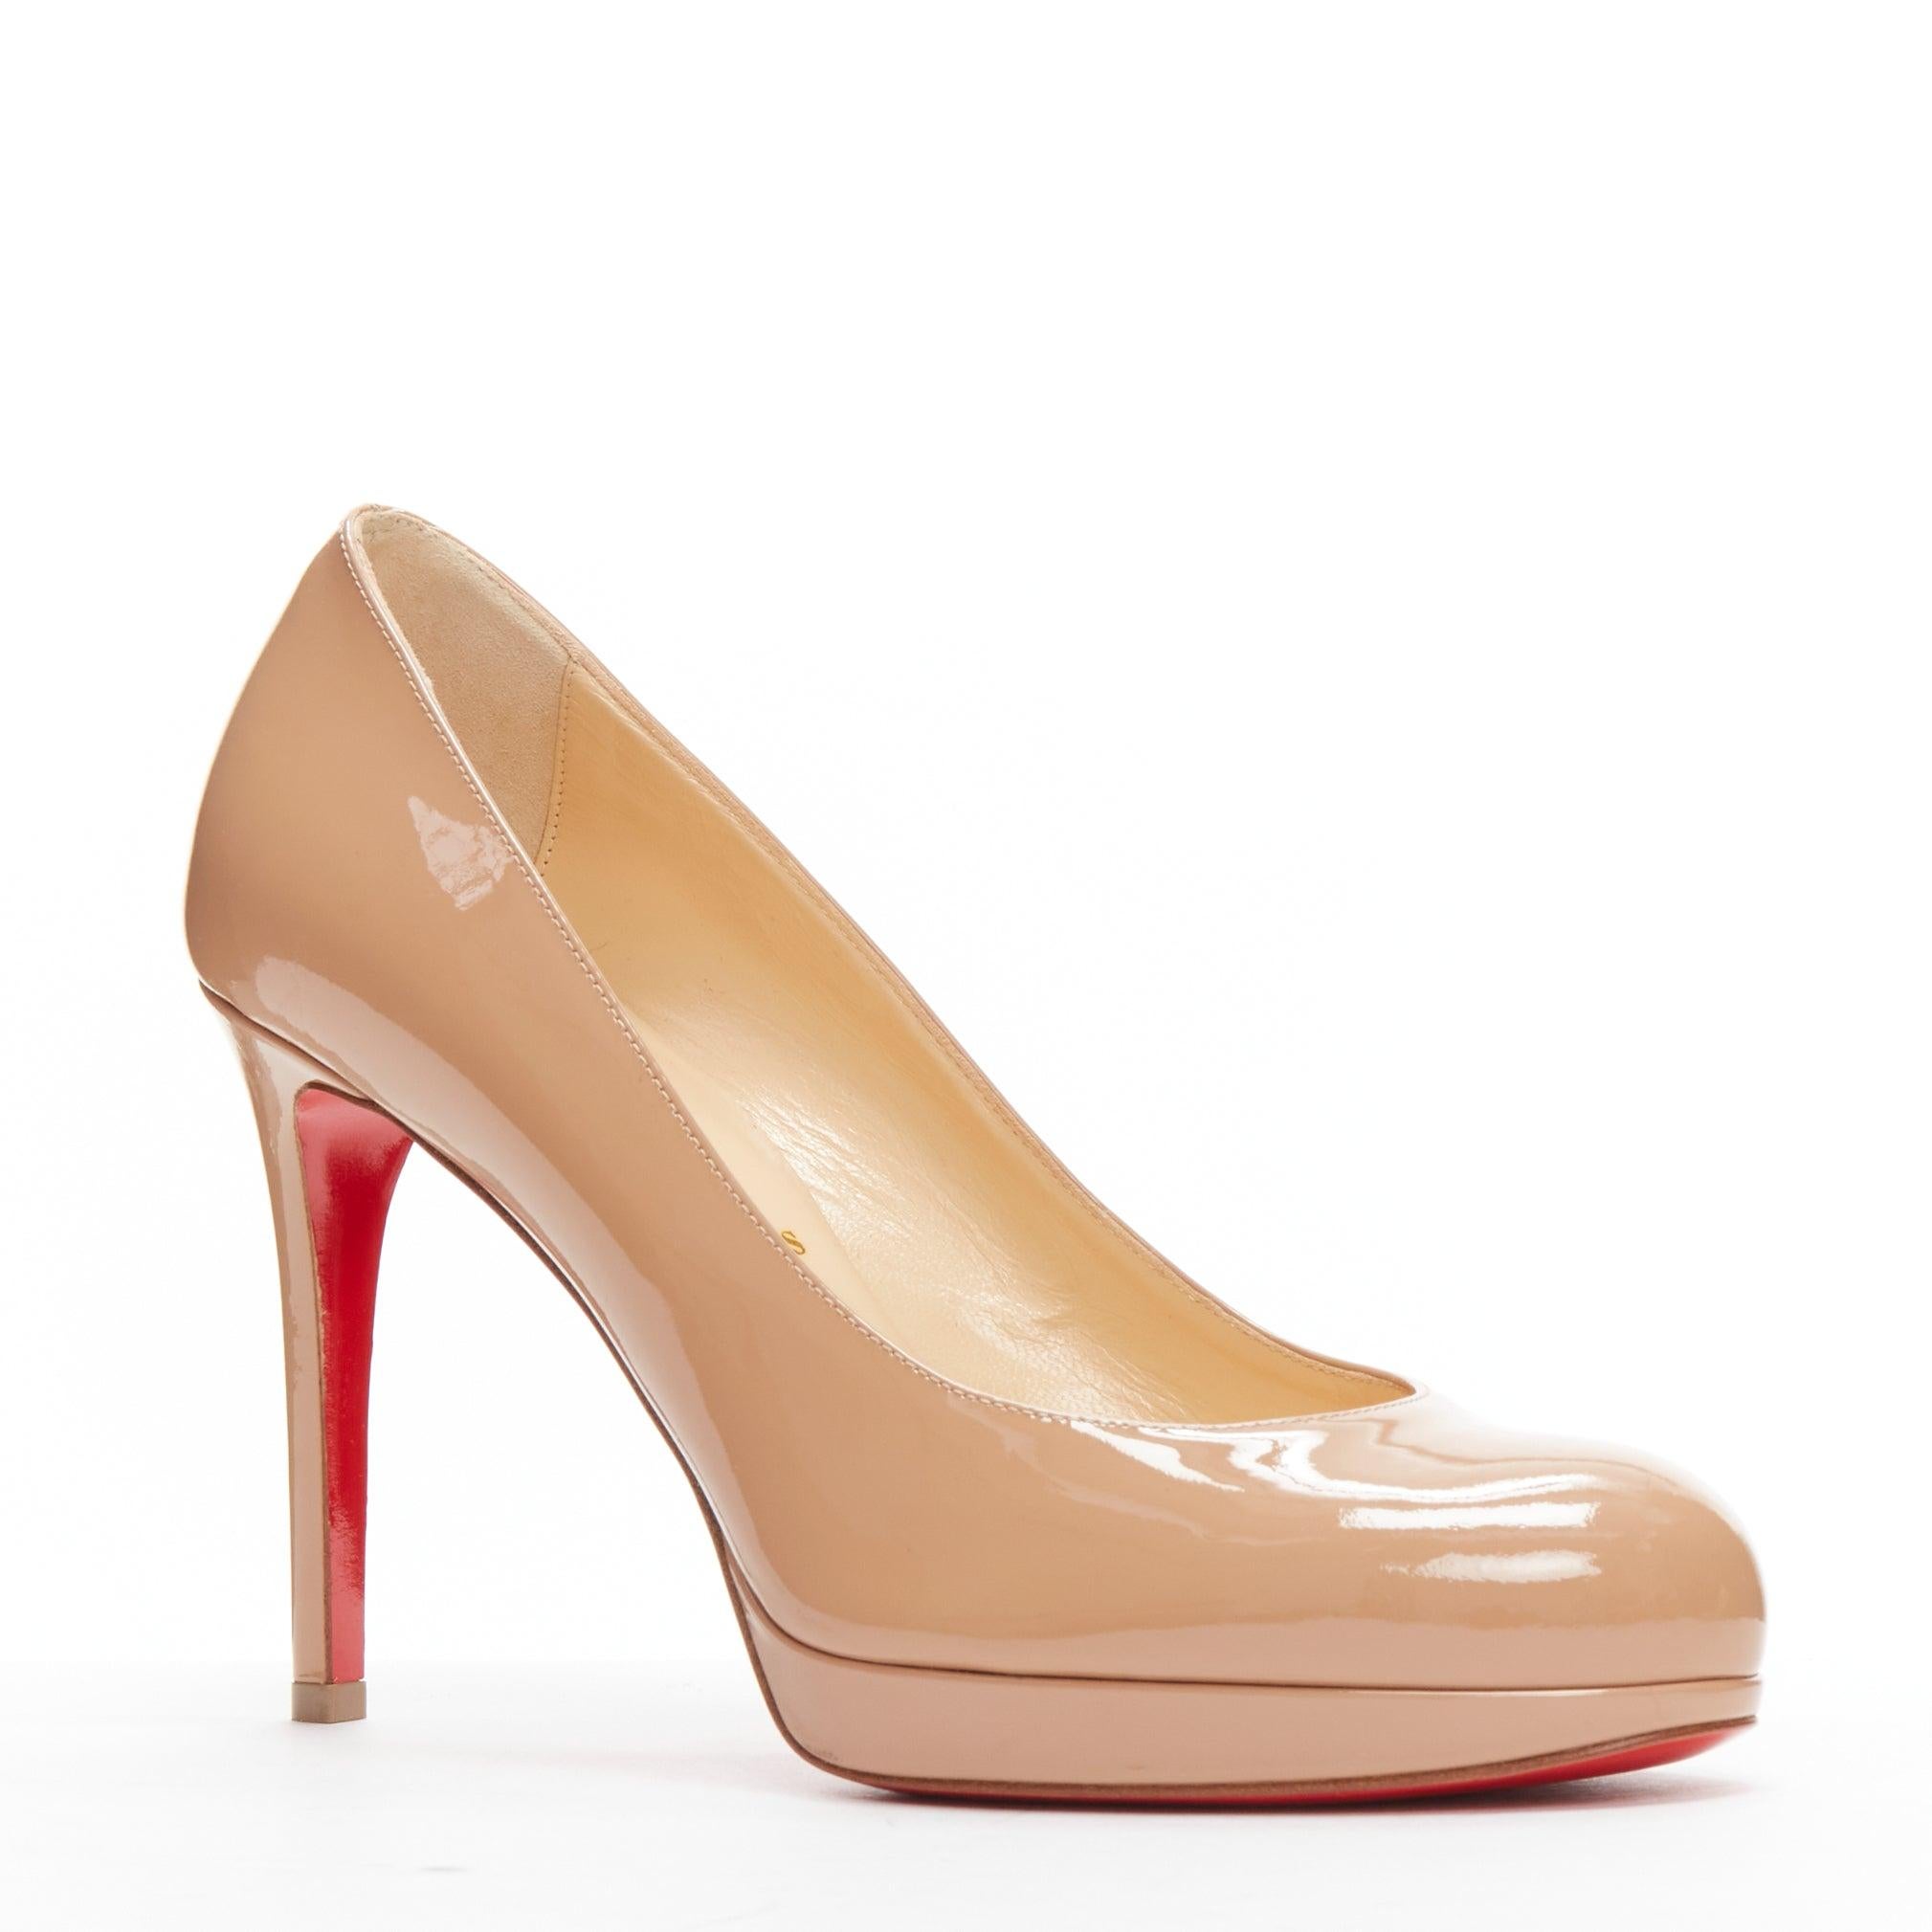 new CHRISTIAN LOUBOUTIN Simple Platform Pump 85 nude patent leather almond toe heels EU37
Reference: CNPG/A00032
Brand: Christian Louboutin
Model: Simple Platfrom Pump 85
Material: Leather
Color: Nude
Pattern: Solid
Closure: Slip On
Lining: Nude